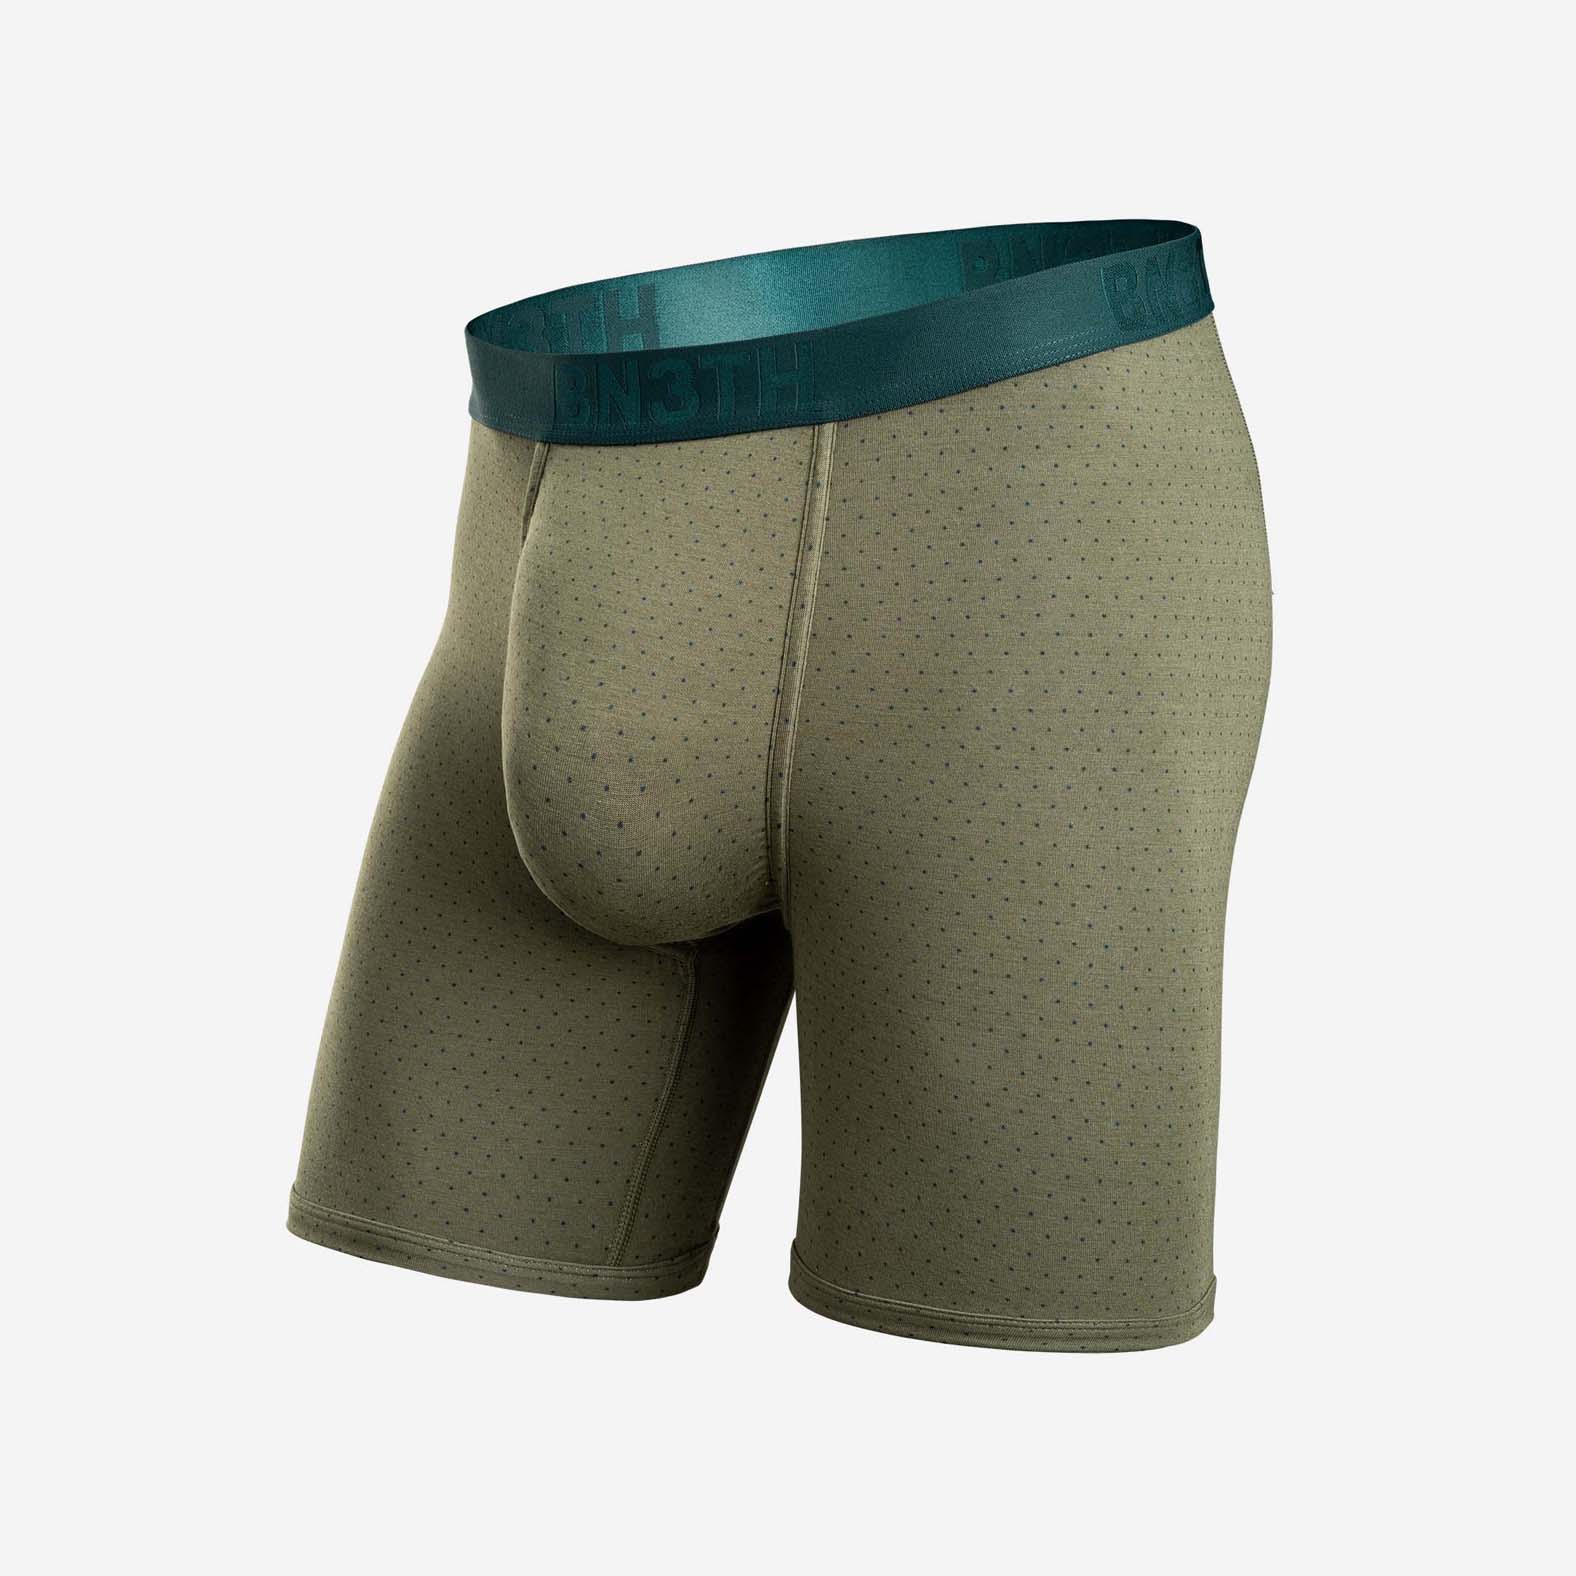 Technical micro-knit boxer brief 2-pack, Under Armour